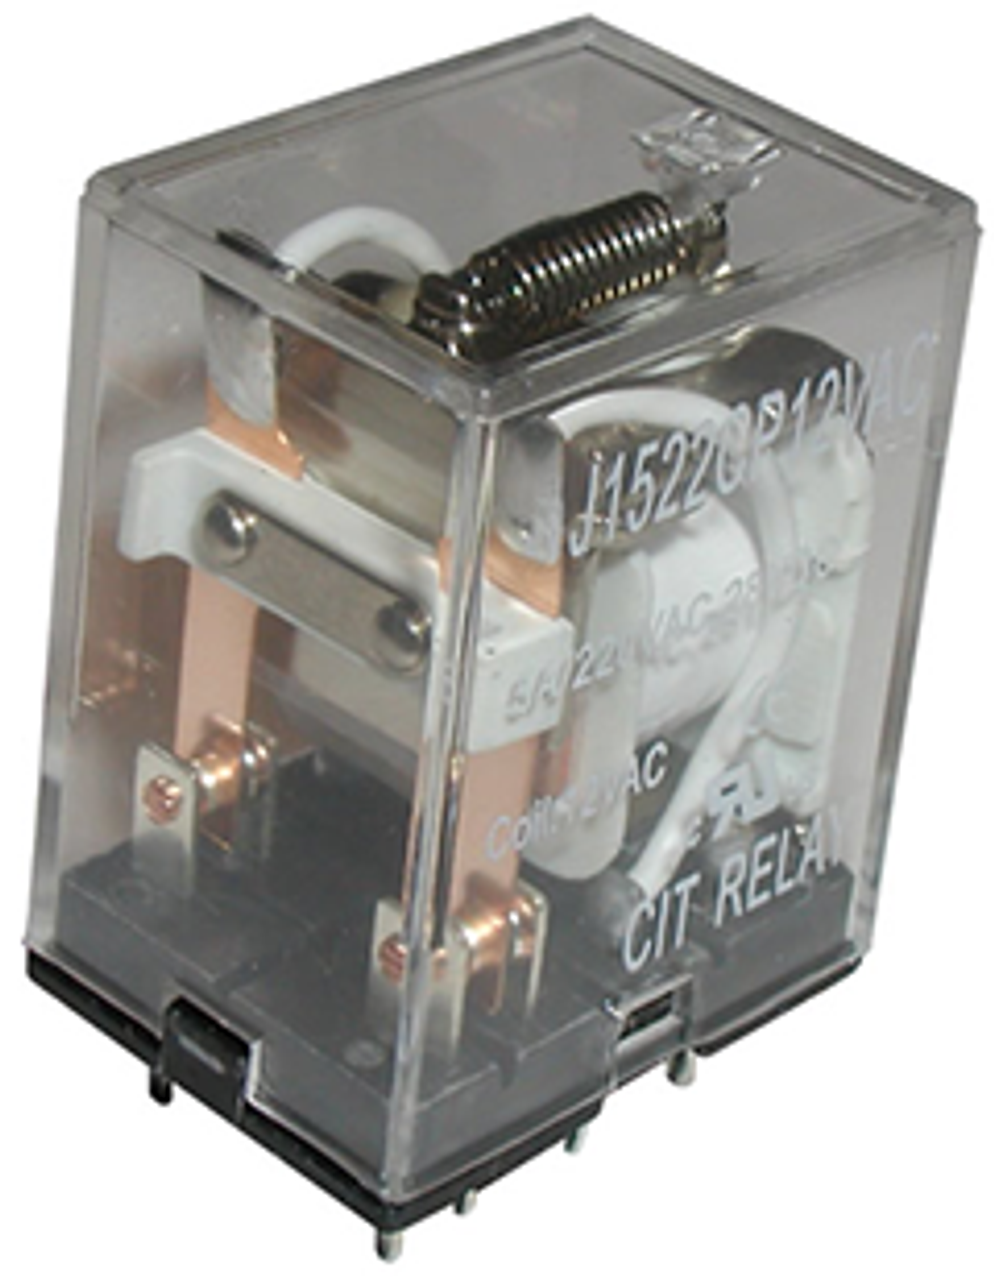 CIT Relay and Switch J1523CF24VDCT Industrial Relays